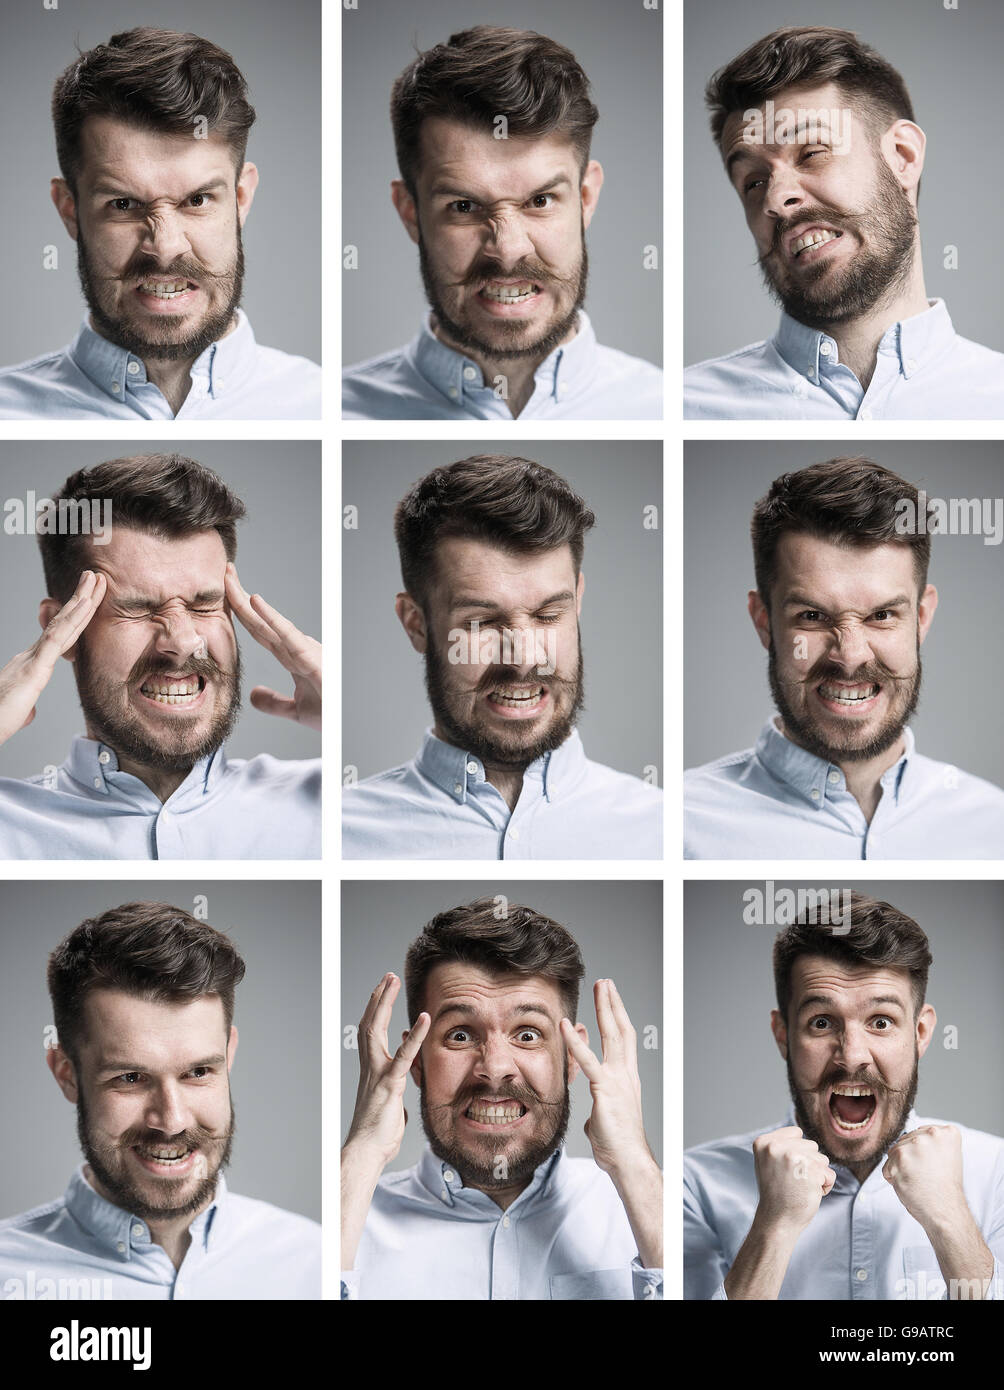 Set of young man's portraits with different emotions Stock Photo